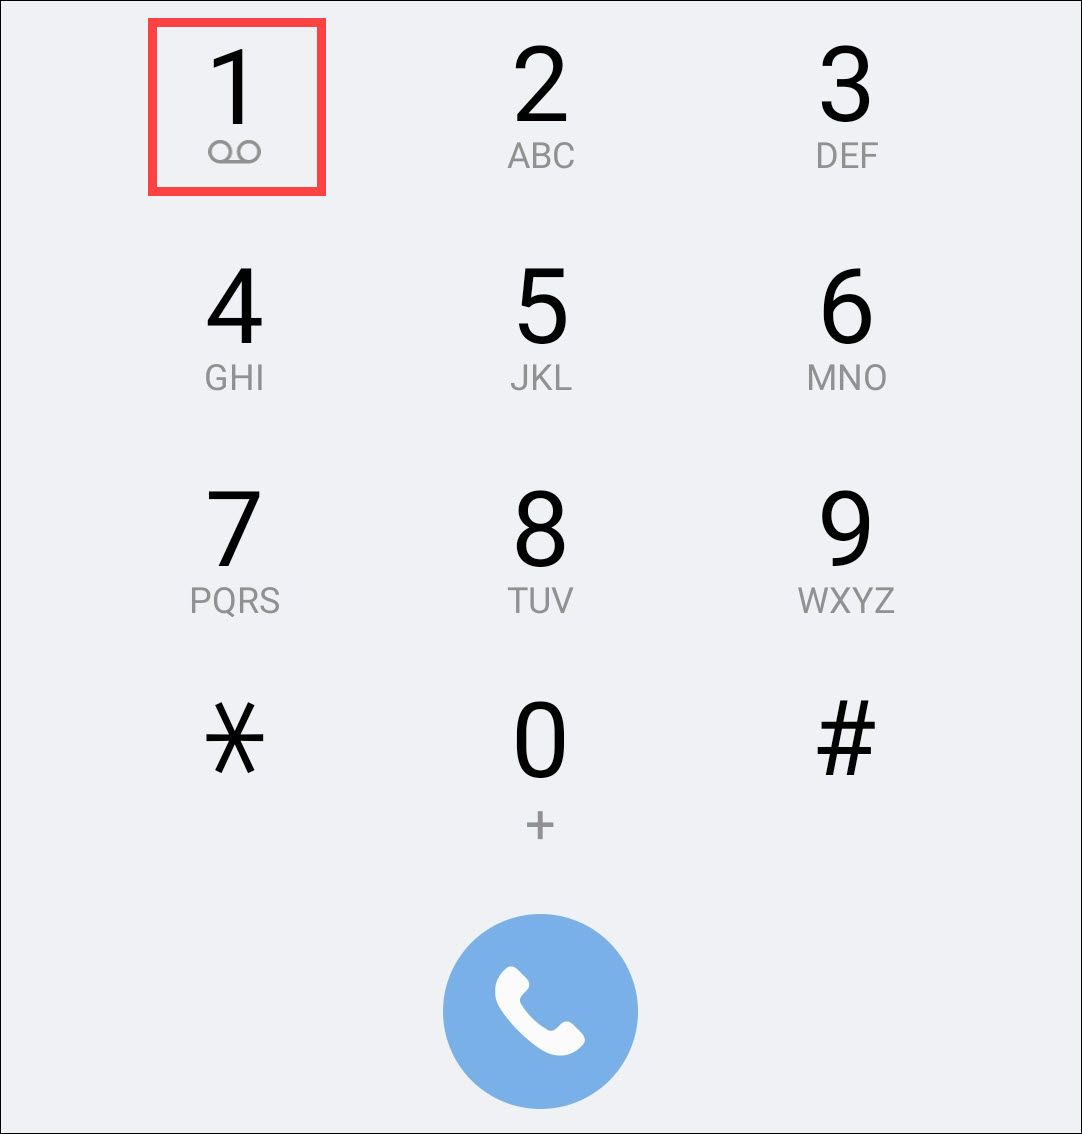 Dial 1 from the Android Phone app.